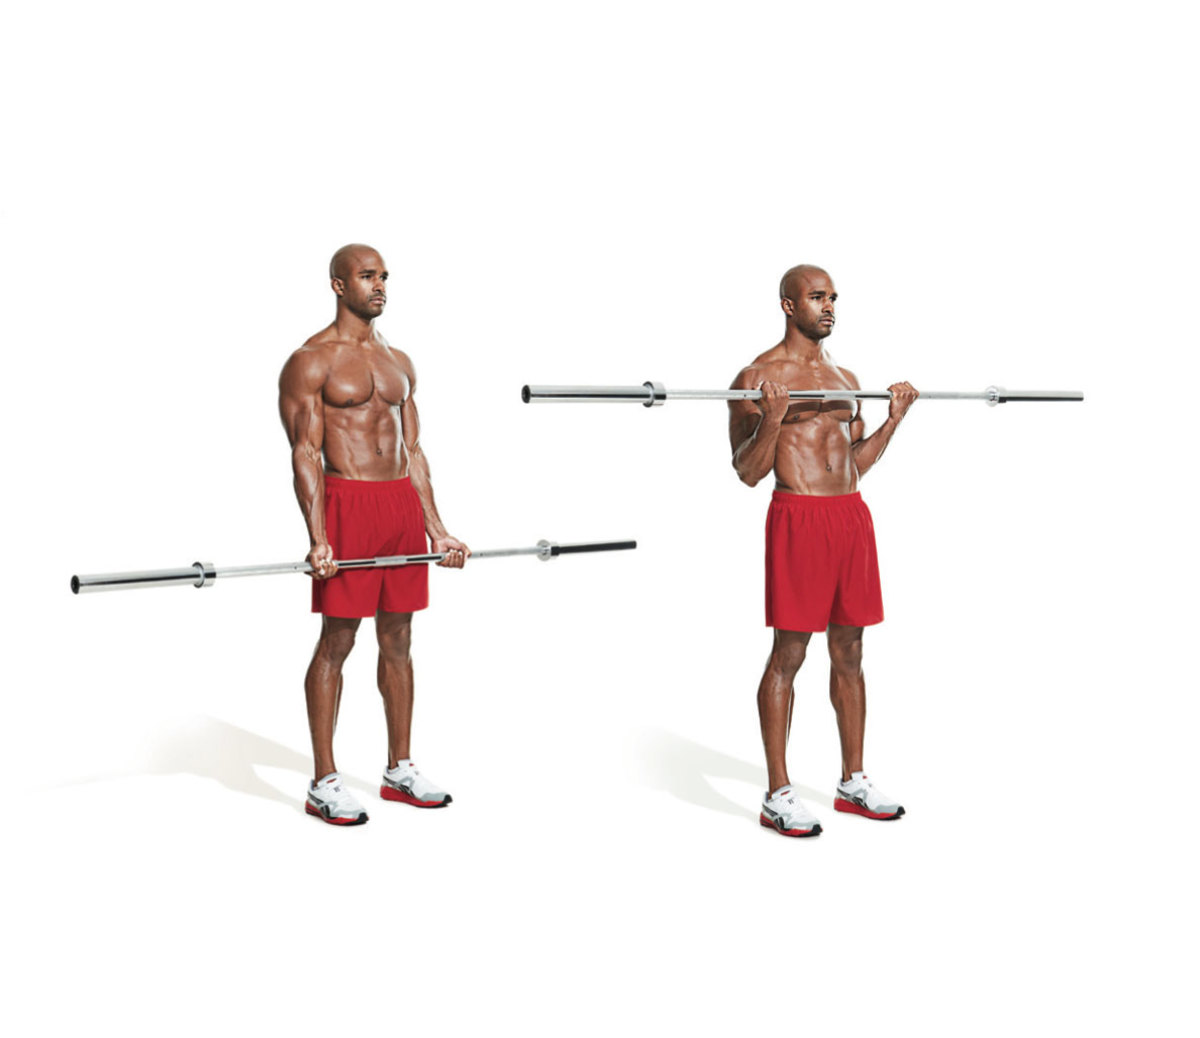 The best workouts for stronger arms